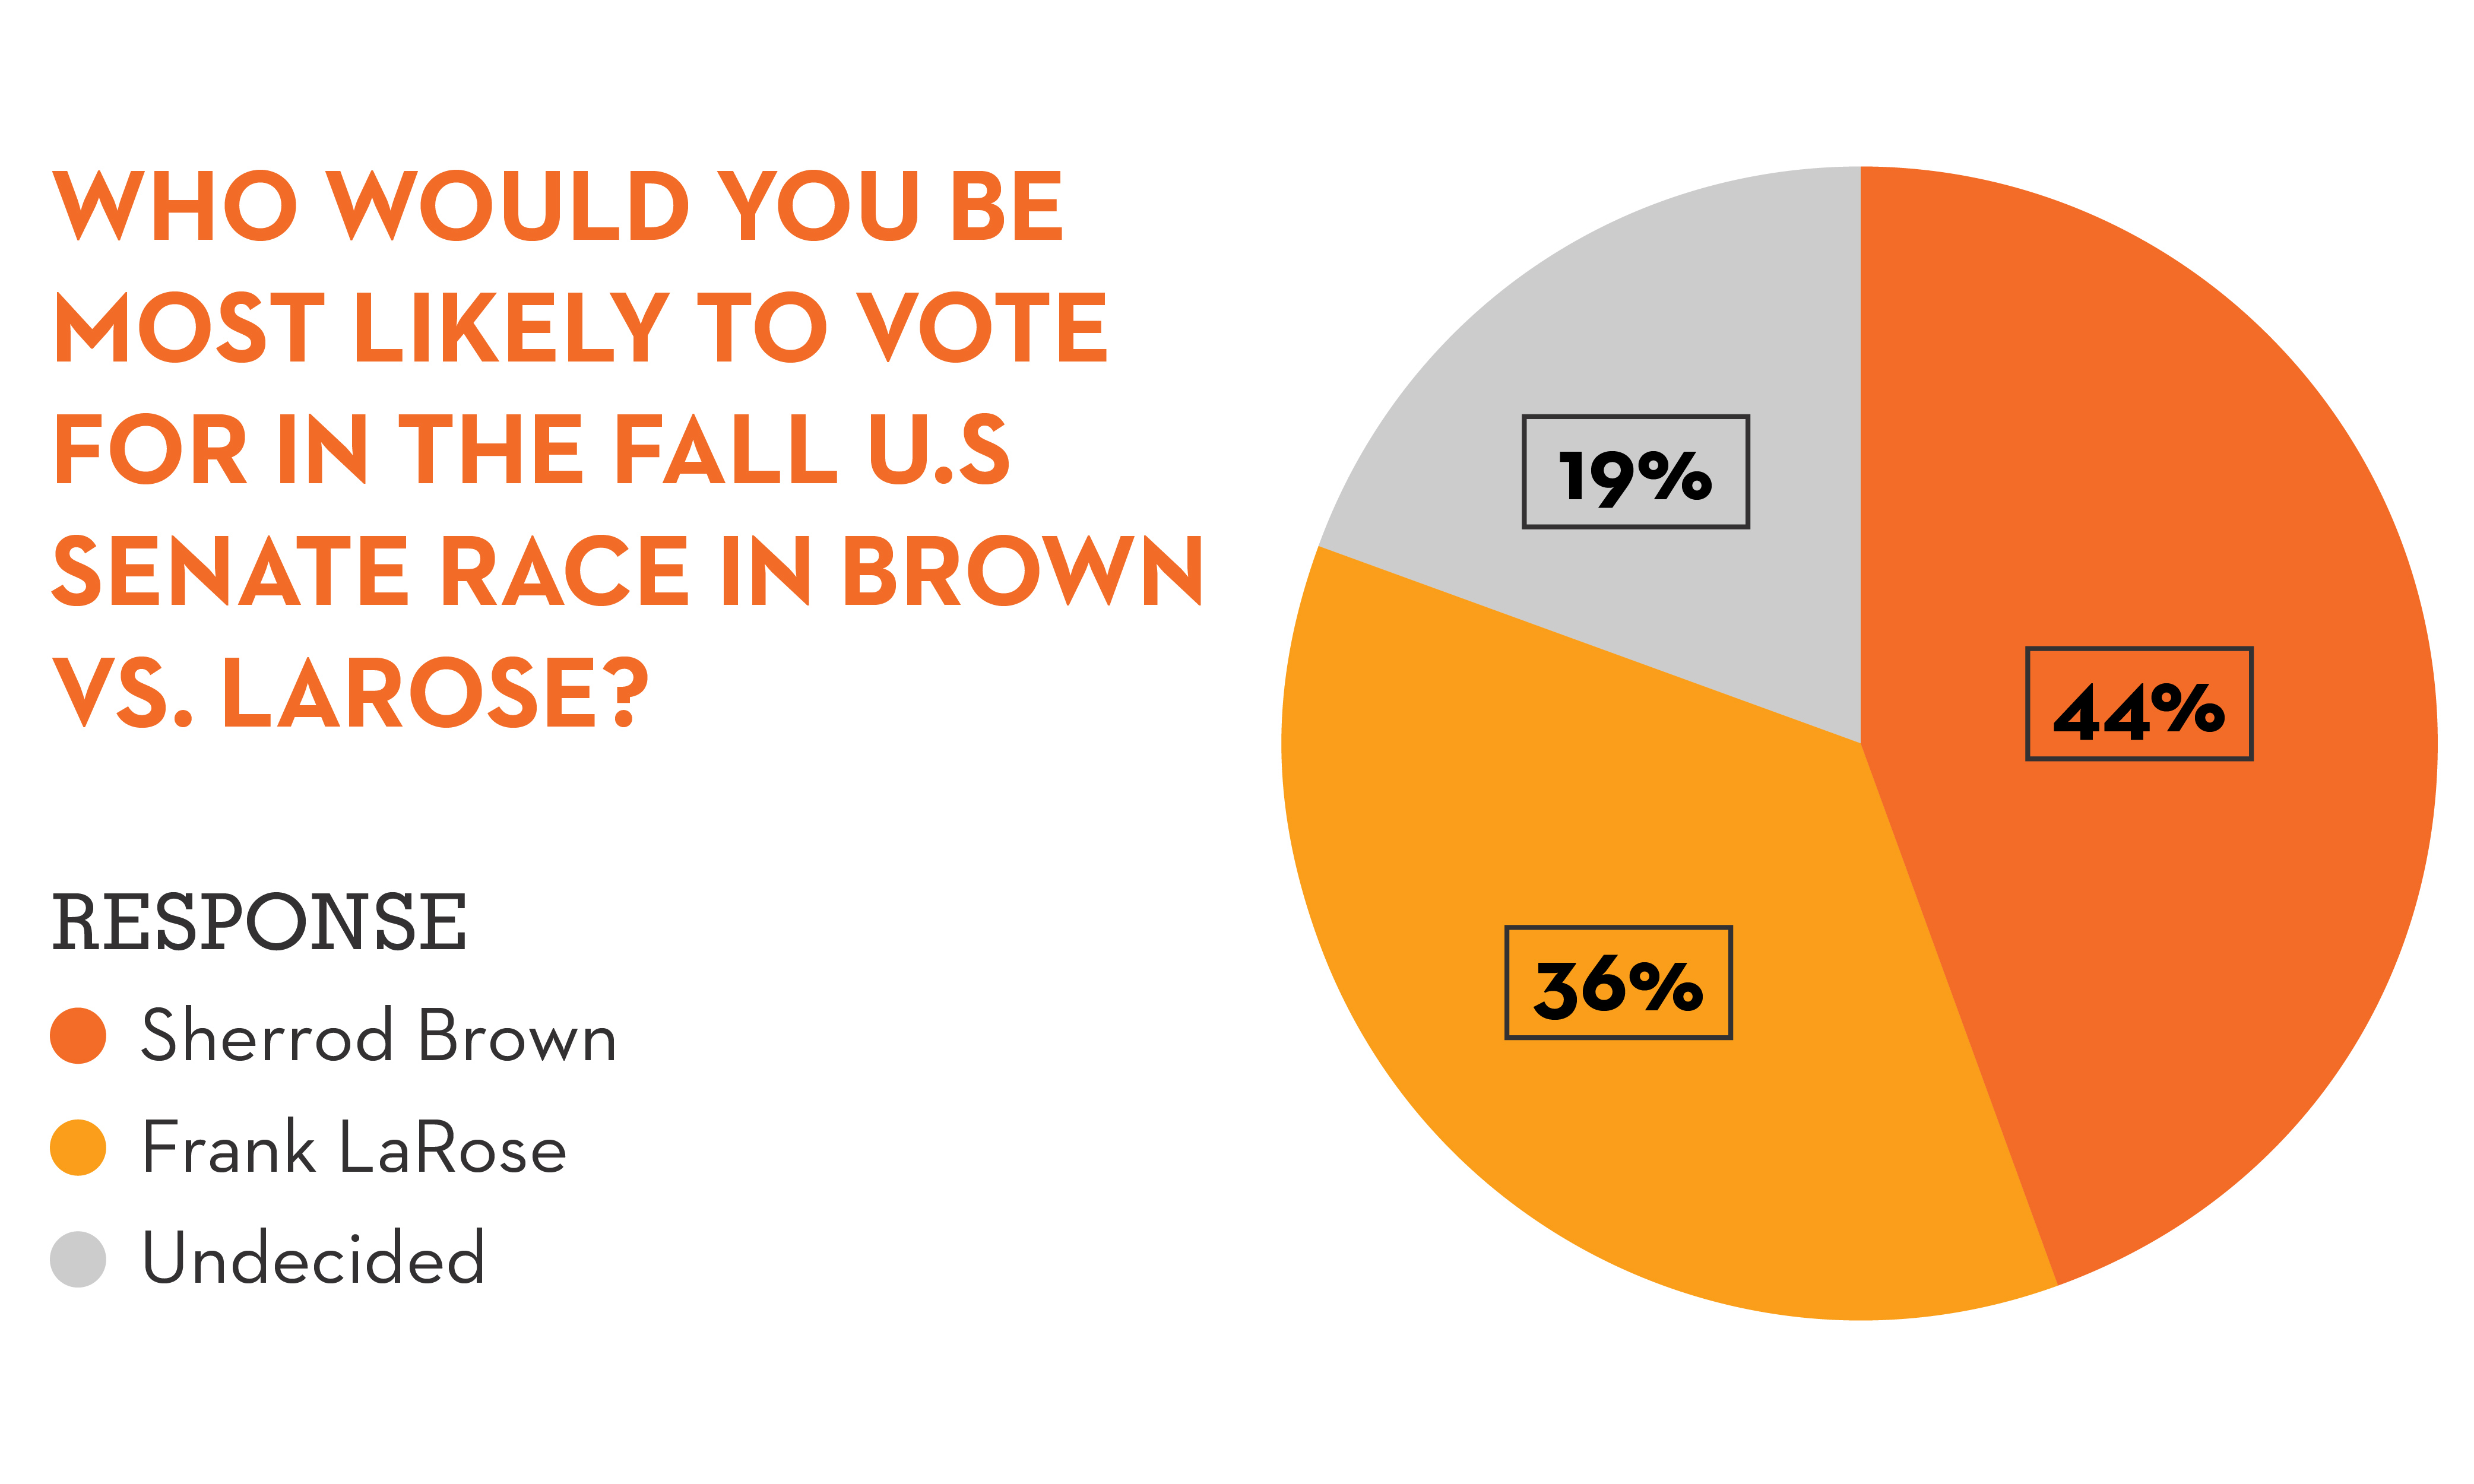 Graphic pie chart answering question "Who would you be most likely to vote for in the fall U.S. Senate Race in Brown vs. LaRose?"